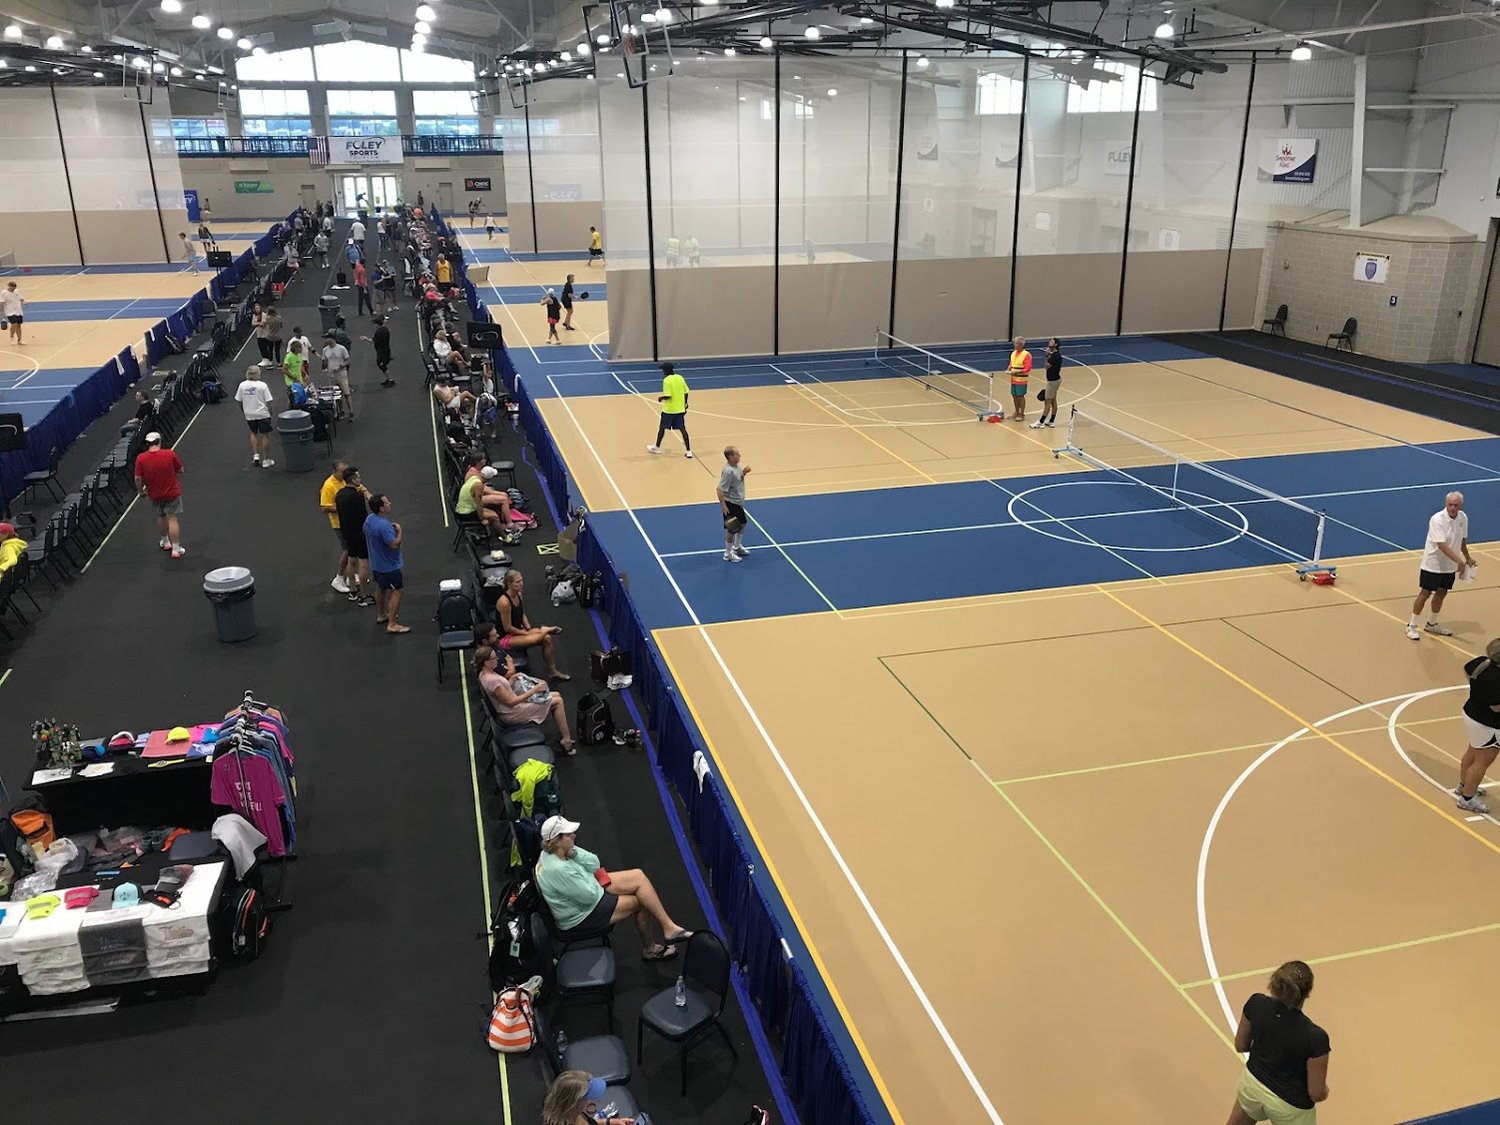 The Foley Event Center and Bama Beach Pickleball Club hosted the Gastric Cancer Foundation’s Charity Classic Aug. 24-28 where 367 players from 11 different states competed across 699 matches to earn 200 medals.